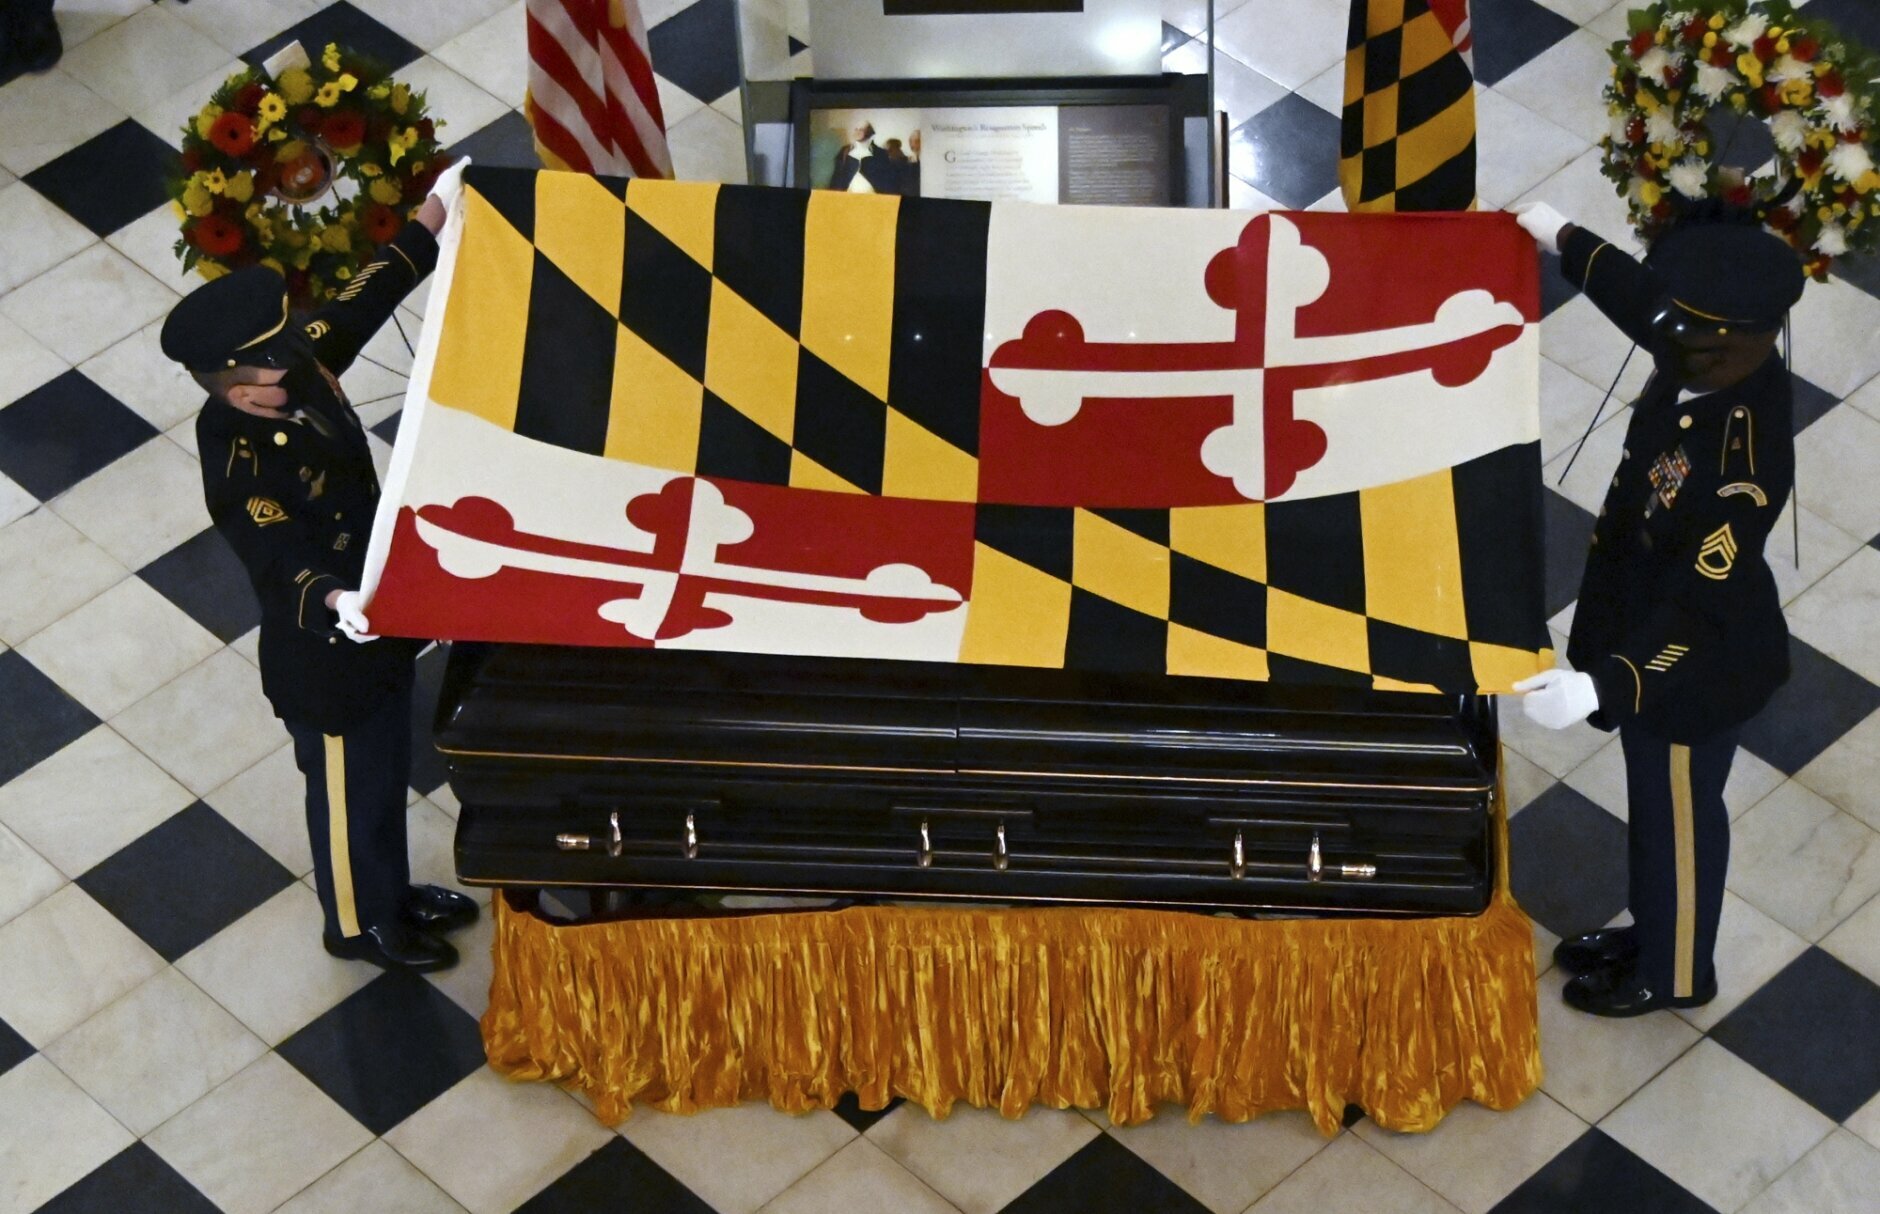 The Maryland National Guard Honor Guard drapes the Maryland flag on the casket of Maryland Senate President Emeritus Thomas V. Mike Miller under the dome of the State House in Annapolis, Md., Thursday, Jan. 21, 2021. (Kim Hairston/The Baltimore Sun via AP, Pool)